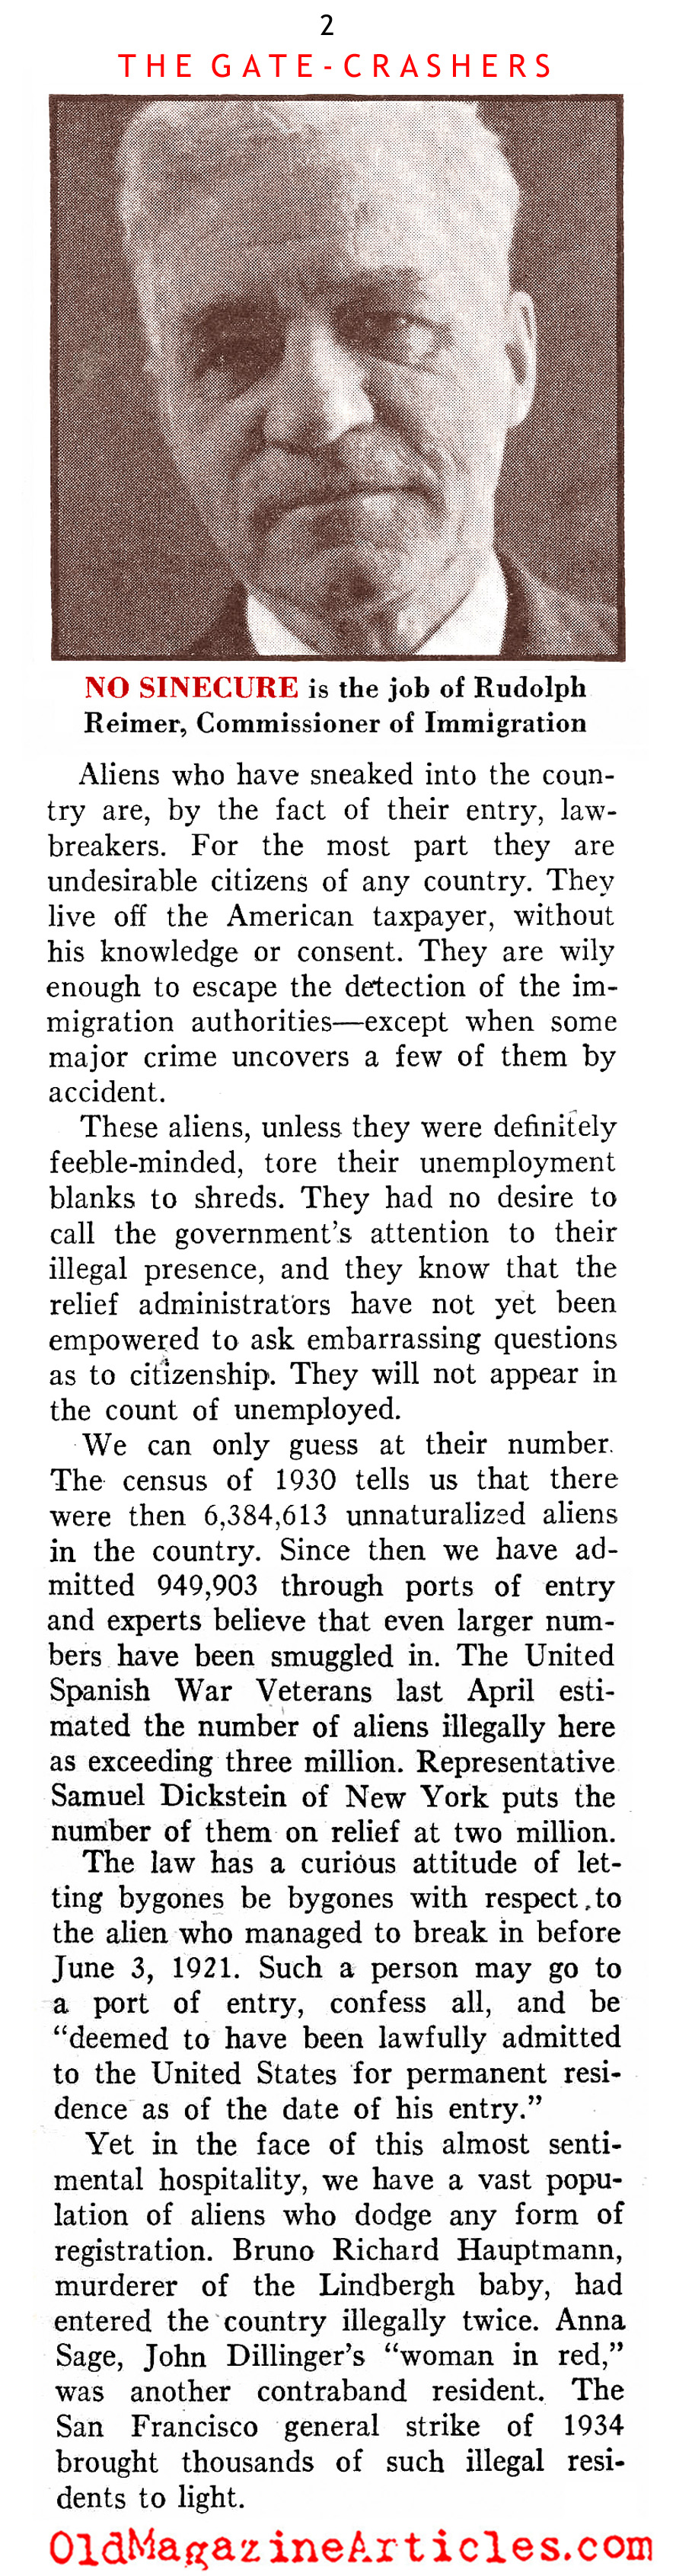 Deported From Ellis Island (Literary Digest, 1937)